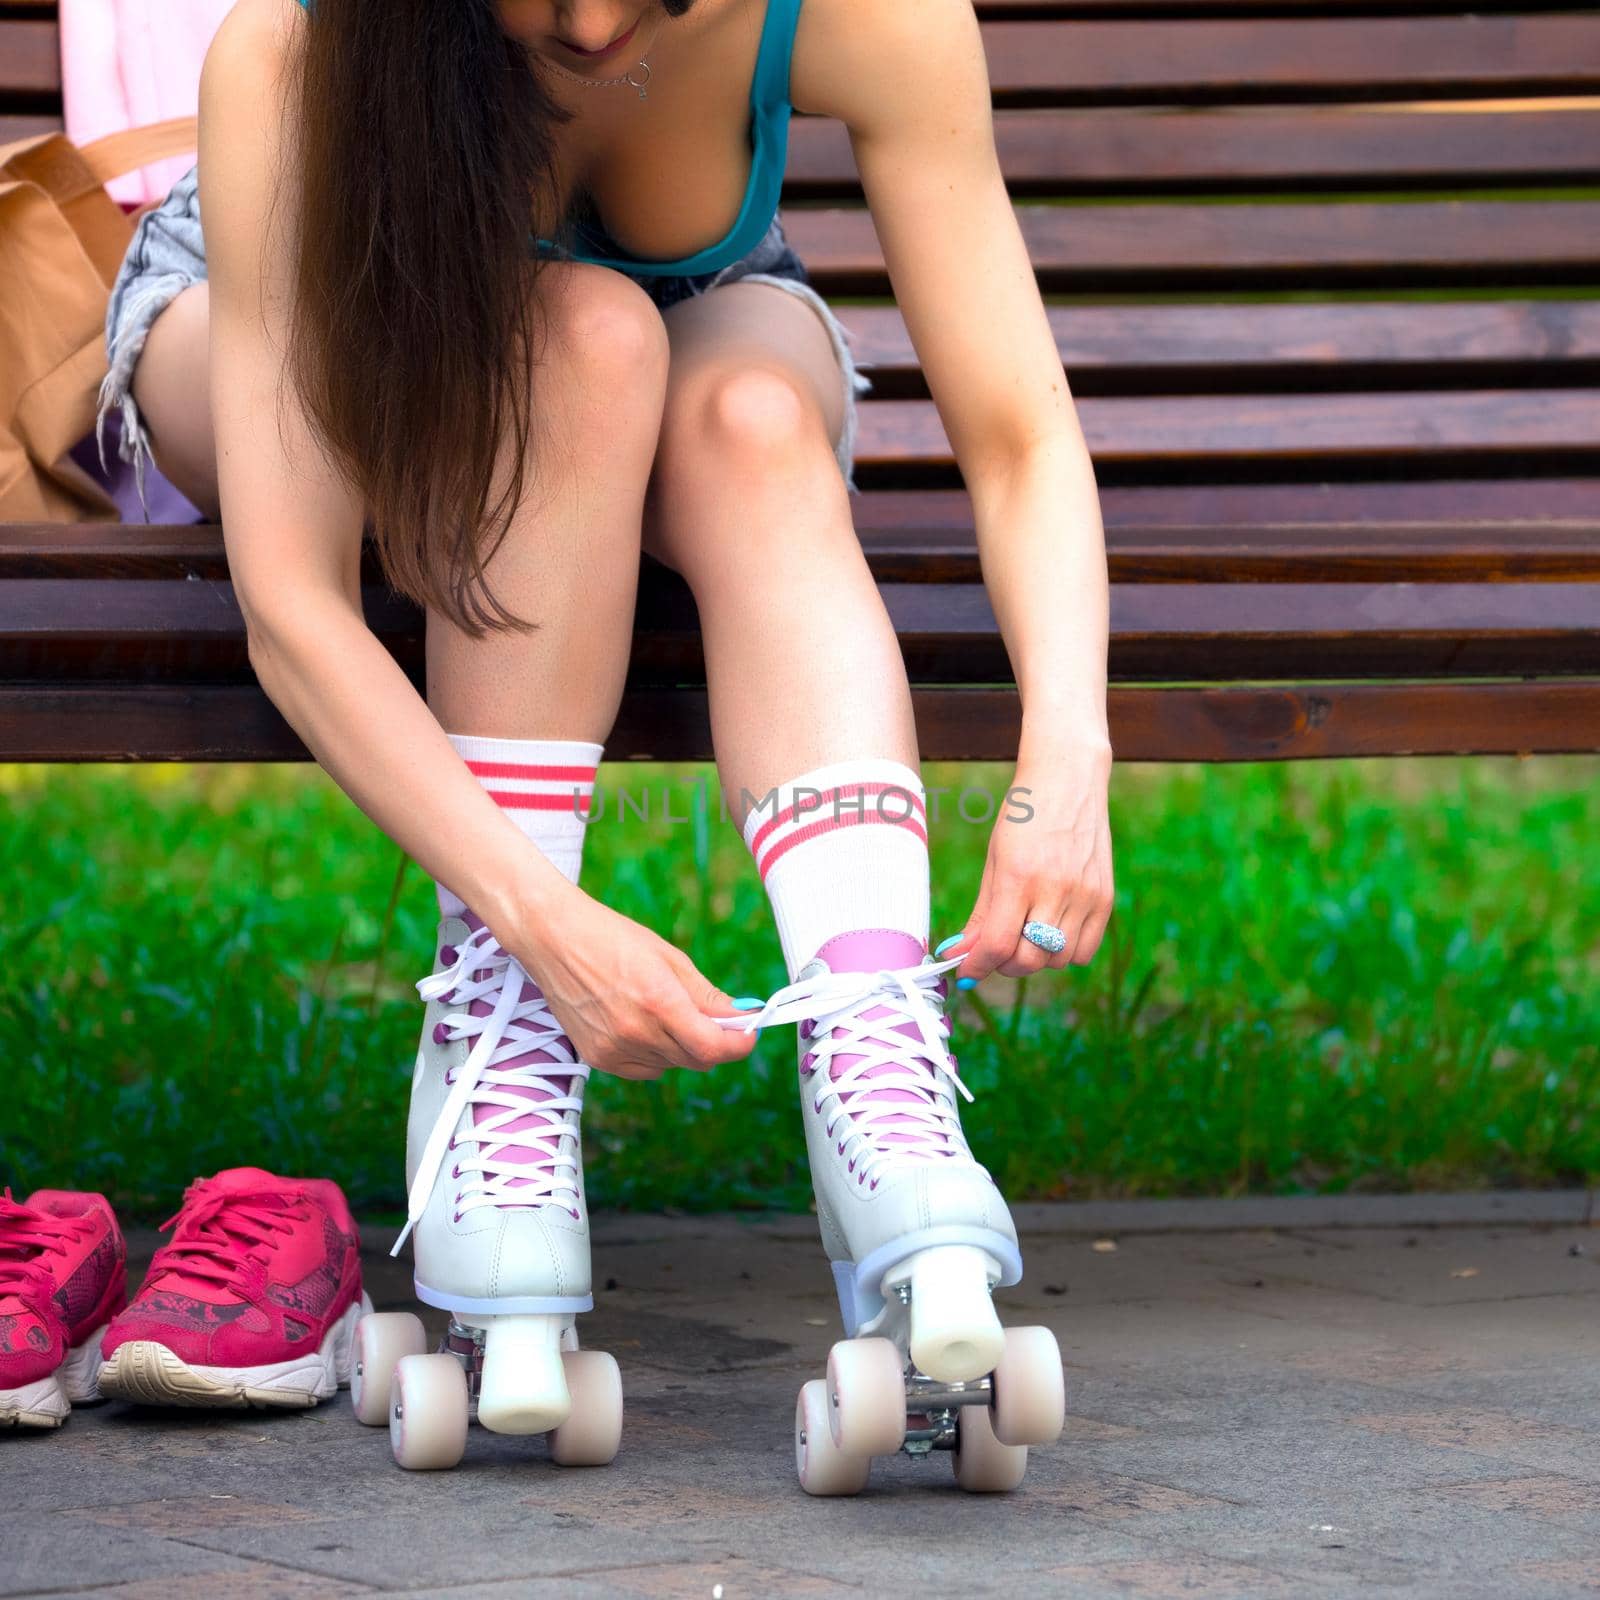 Female skater binds the roller skates on the bench in a park